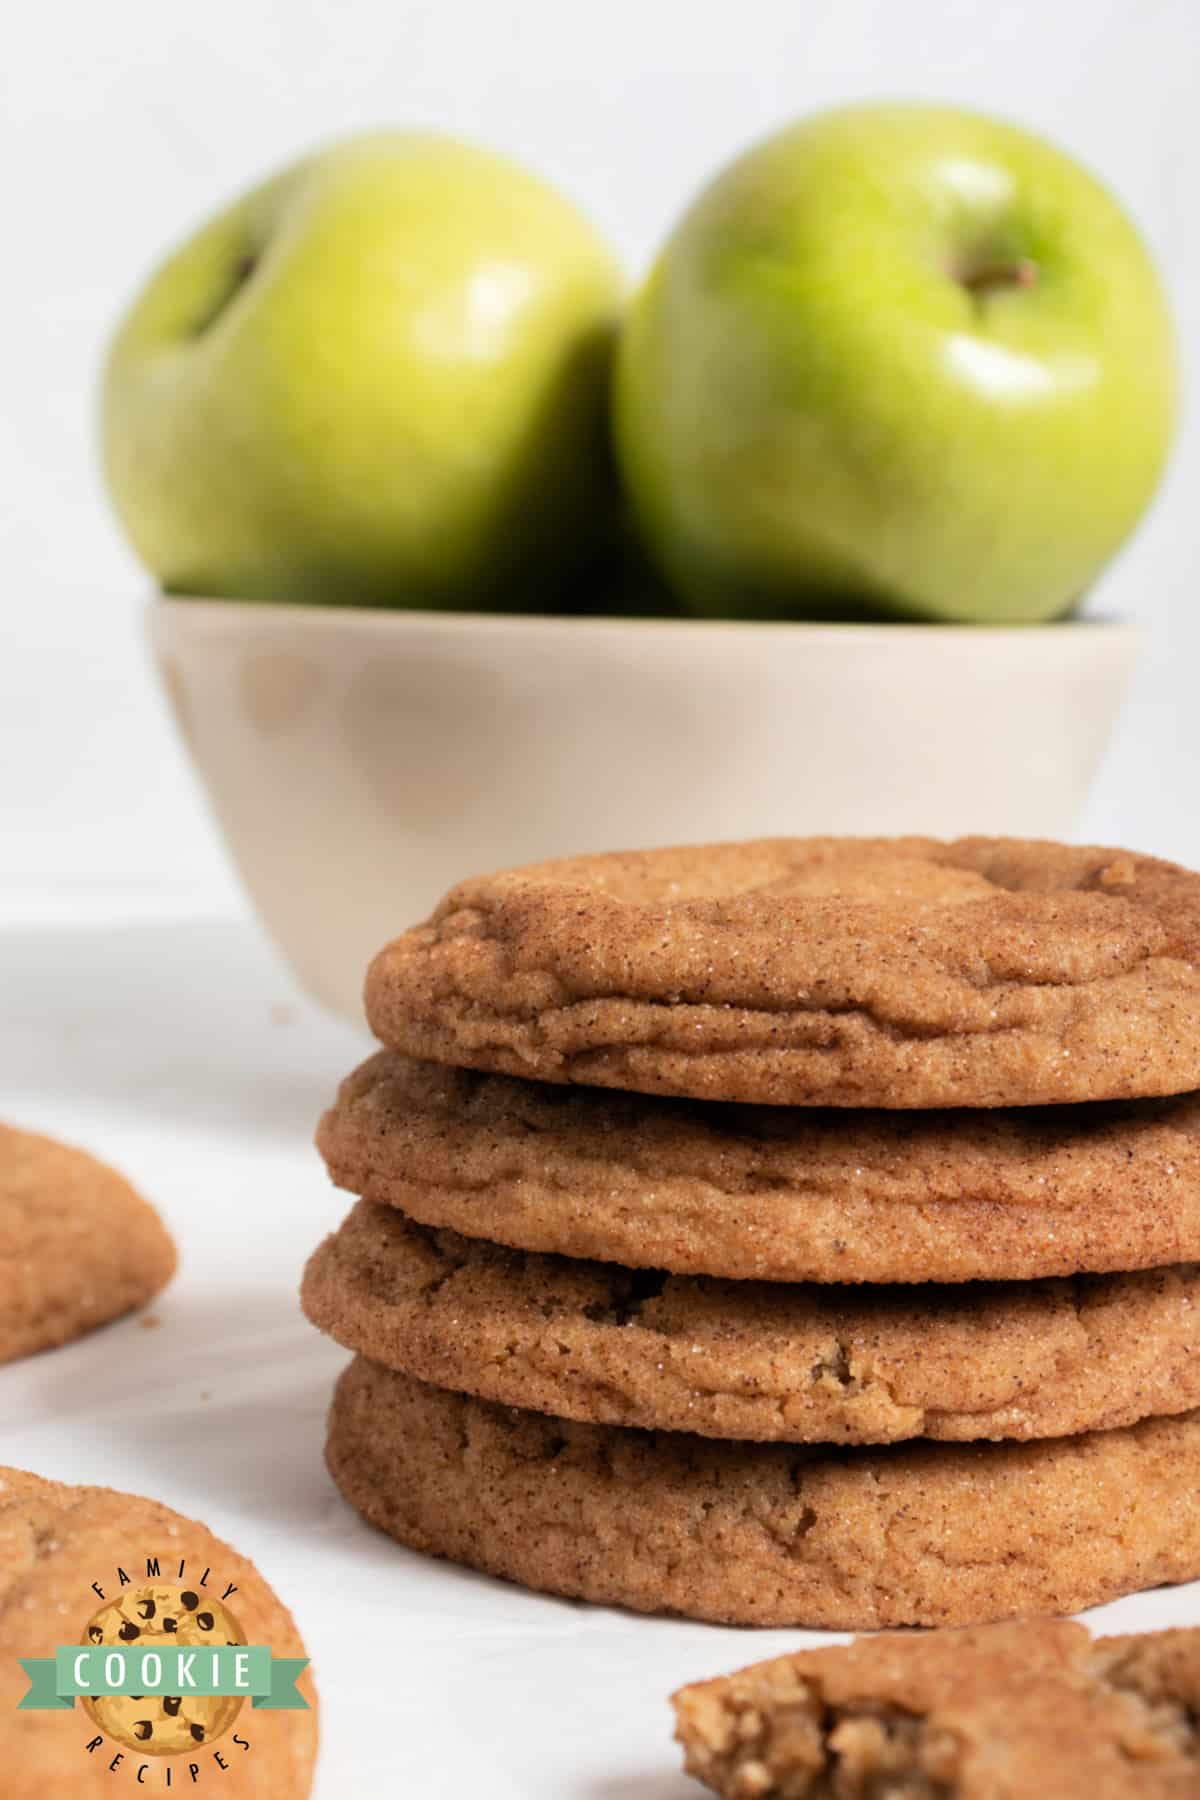 Apple Snickerdoodle Cookies are soft, chewy and full of apple flavor. Made with apple butter and rolled in cinnamon sugar for an irresistible cookie that’s perfect for the fall!